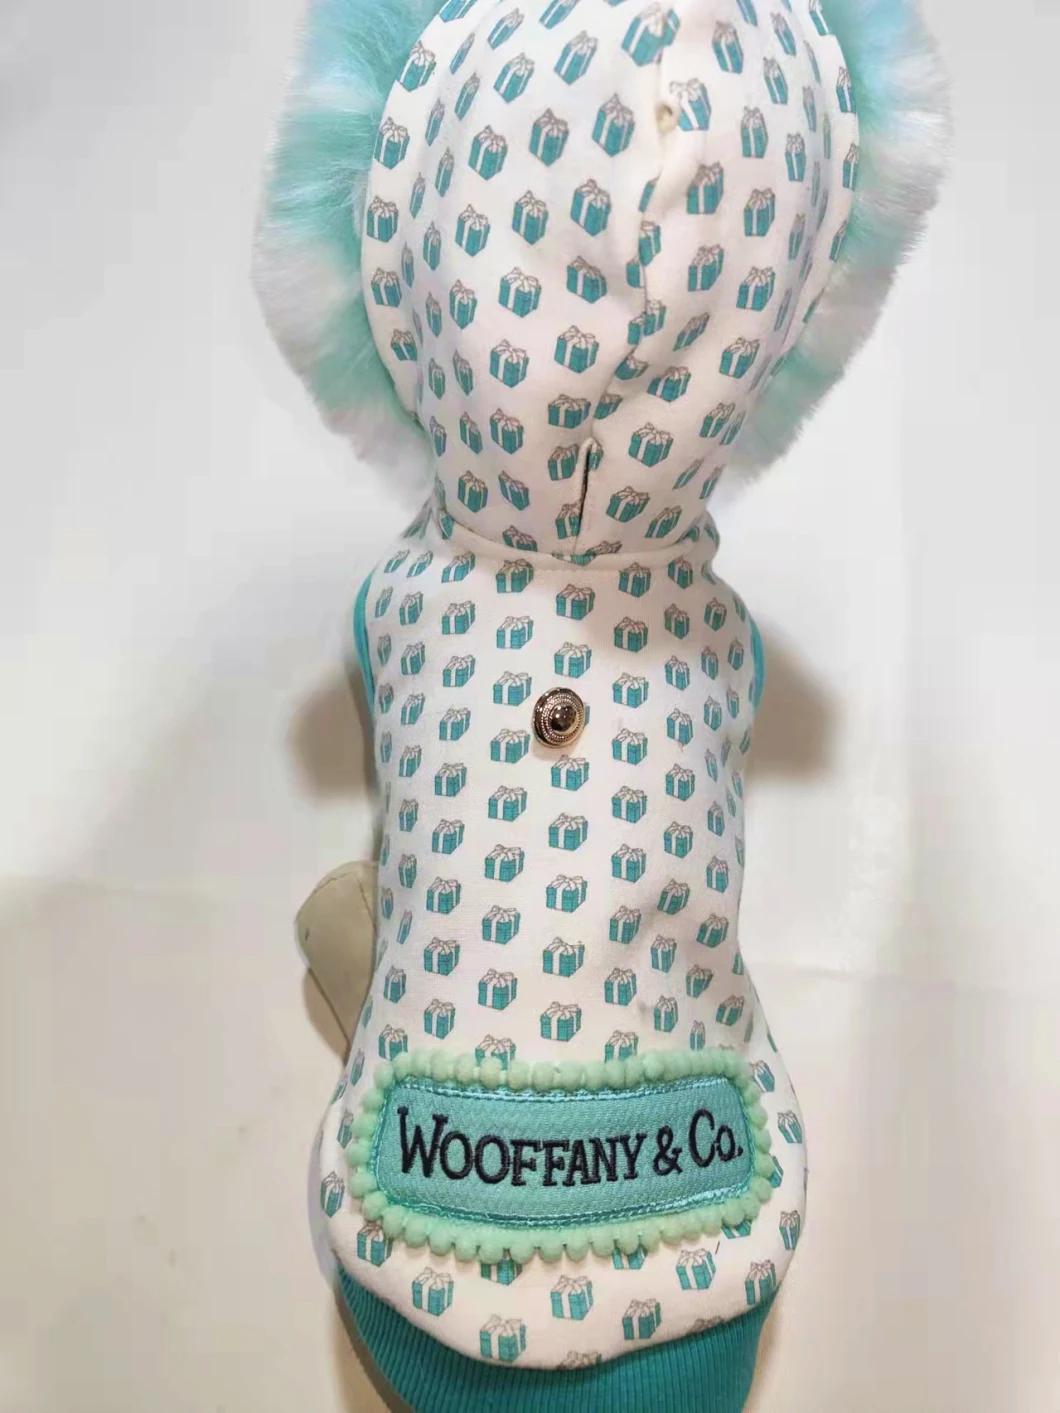 Wooffany & Co. Fashion Designer Dog Hoodie Pet Hoodie Pet Products Accessories